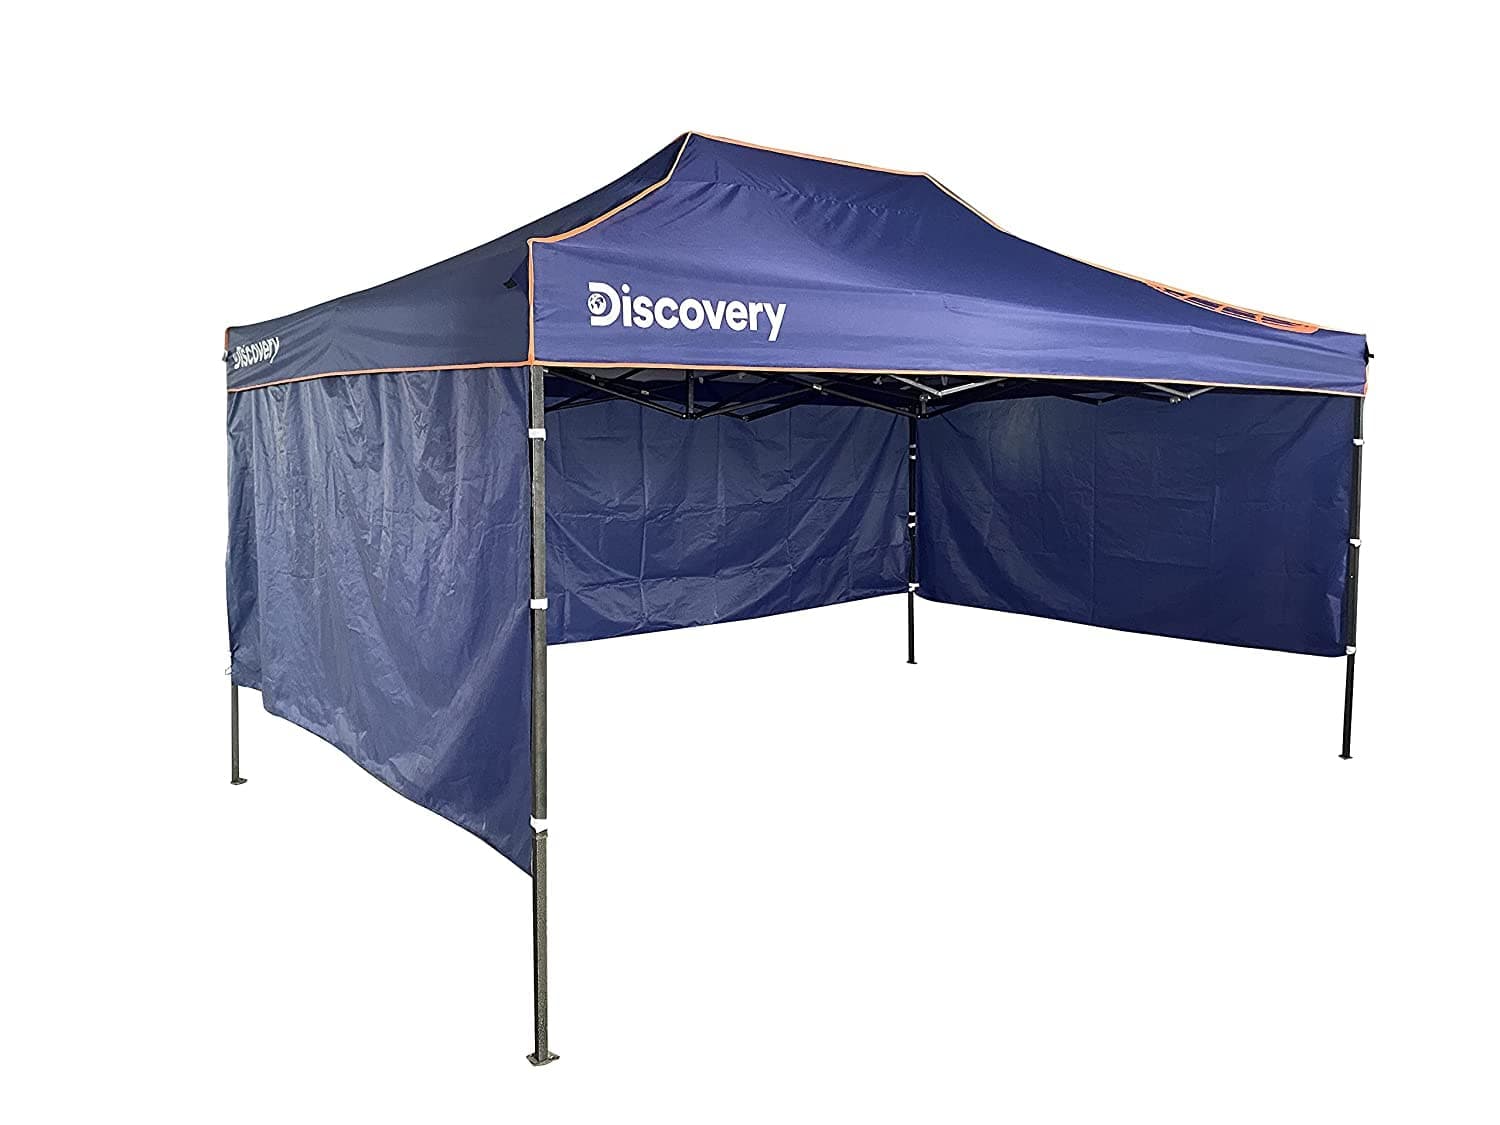 Shop for Discovery Adventures Discovery 30 Gazebo, 3 M Length on outback.ae